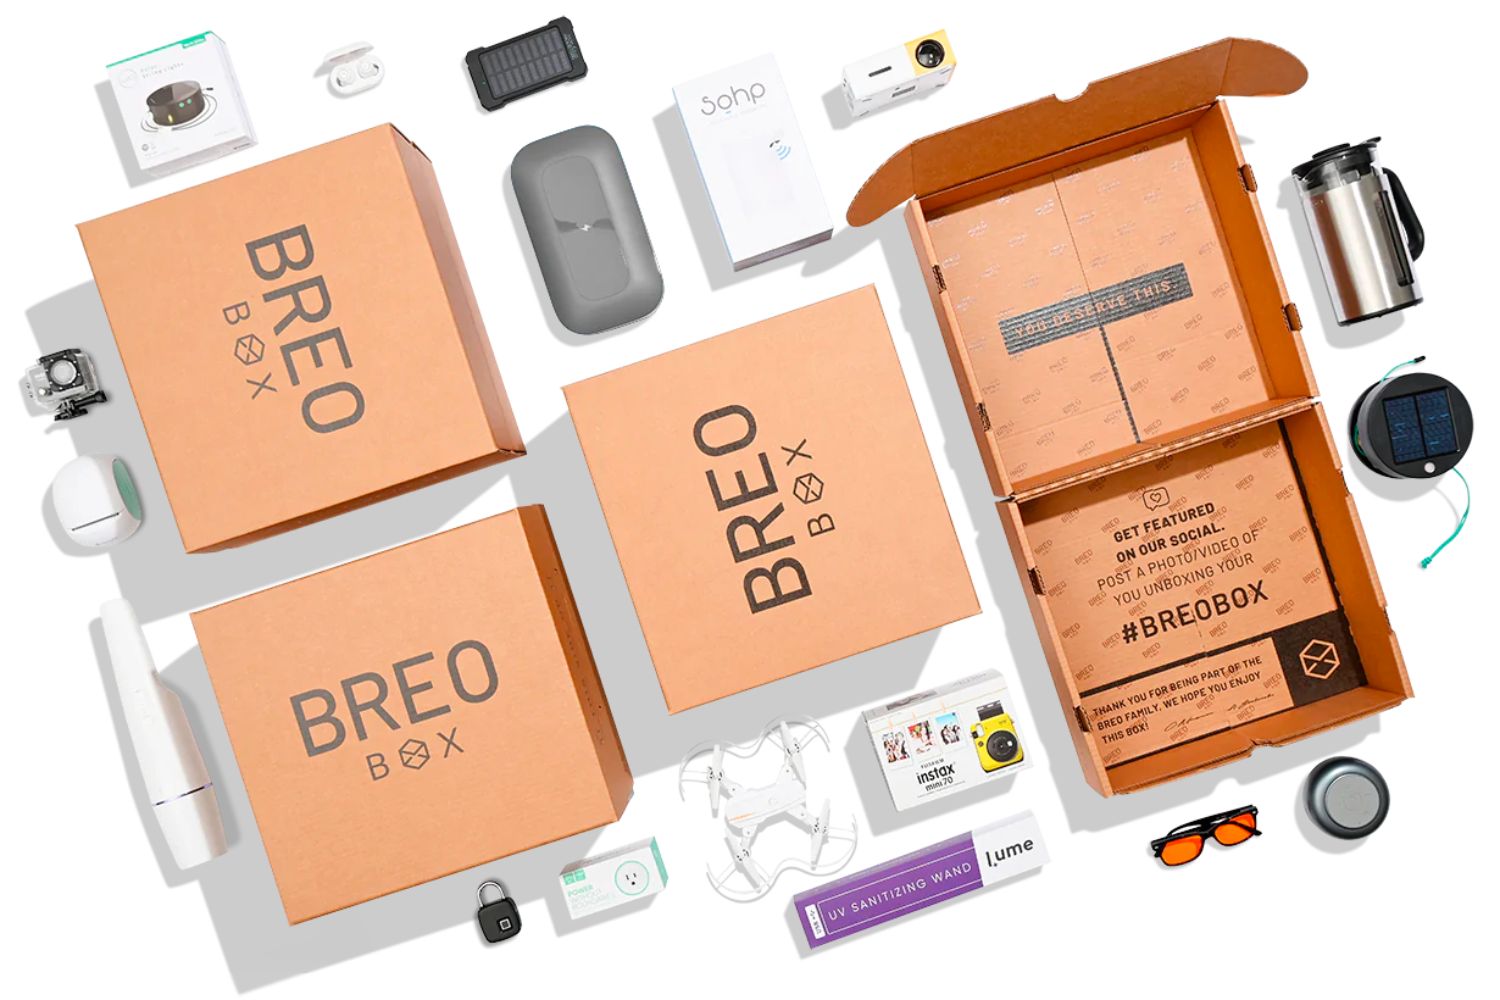 The Best Subscription Gifts: Breo Box